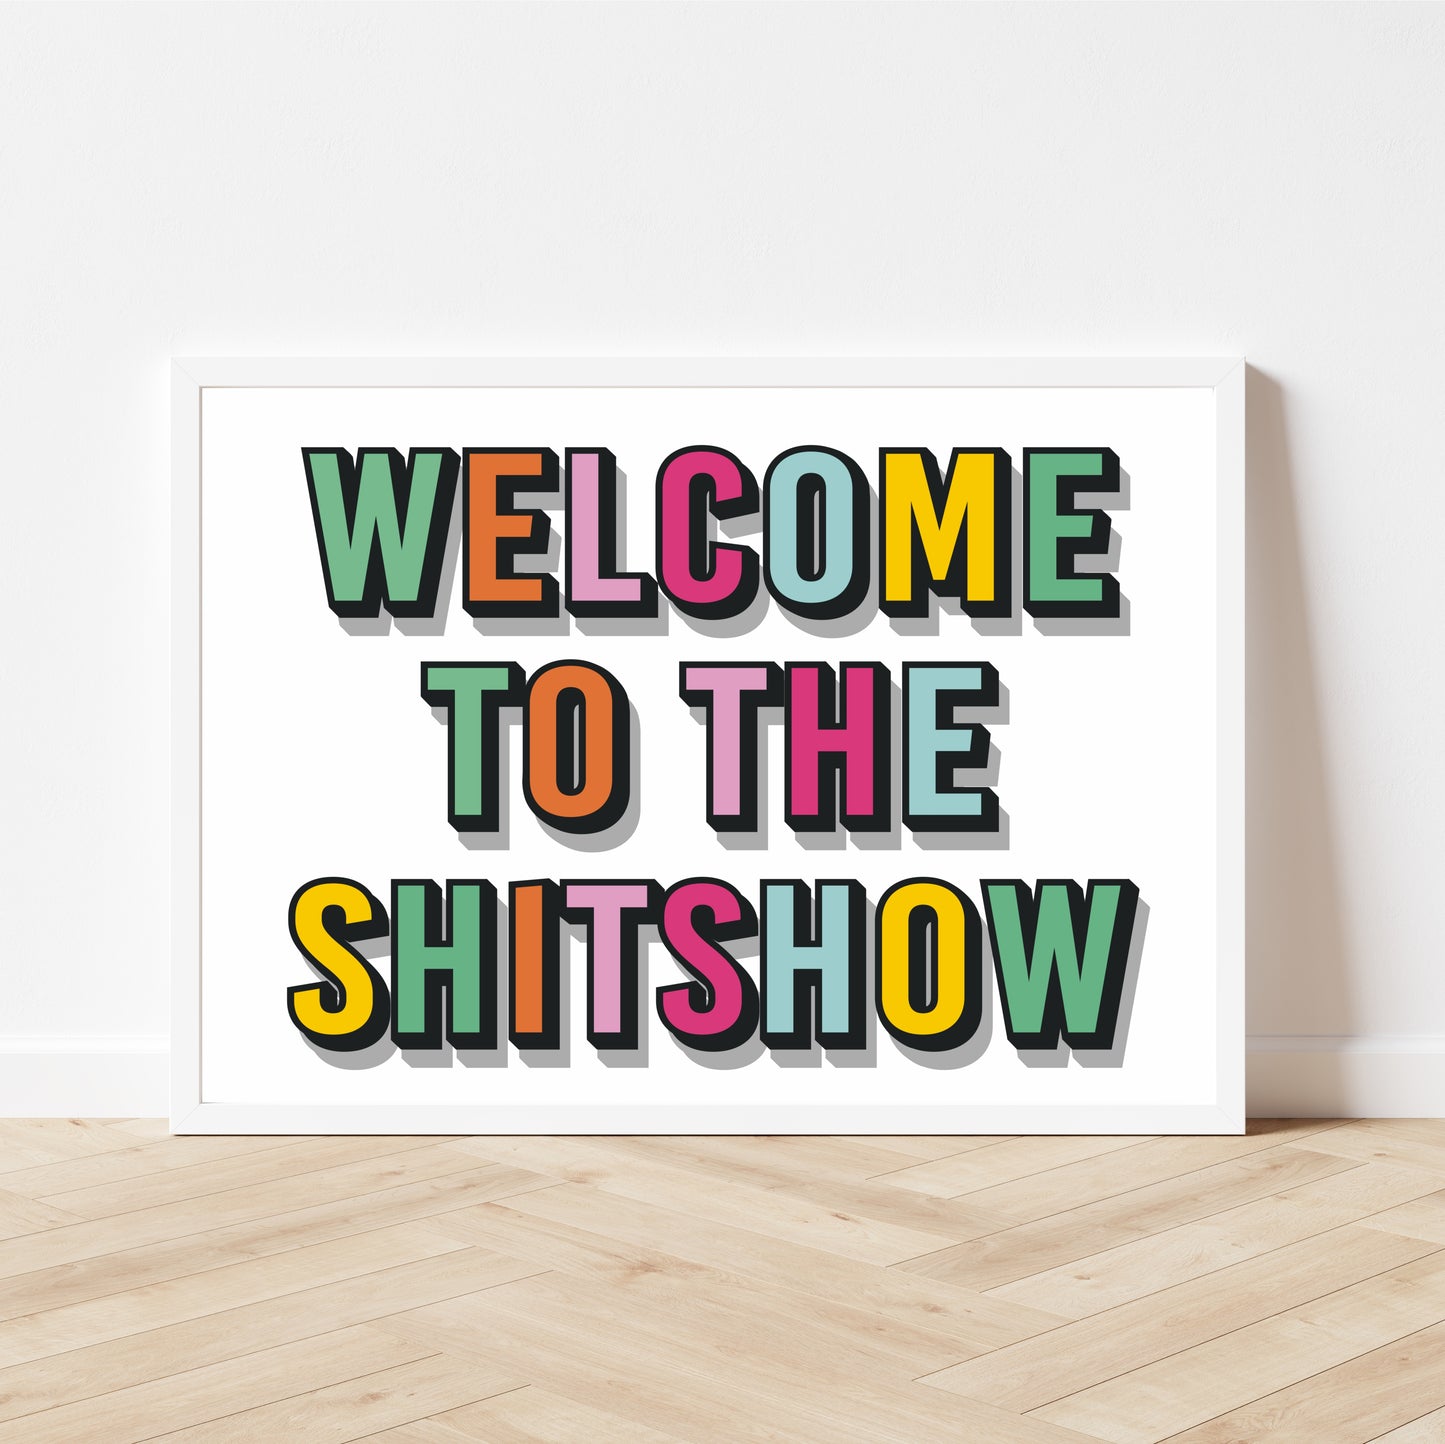 'Welcome to the shitshow' Print - writing in bright rainbow colours